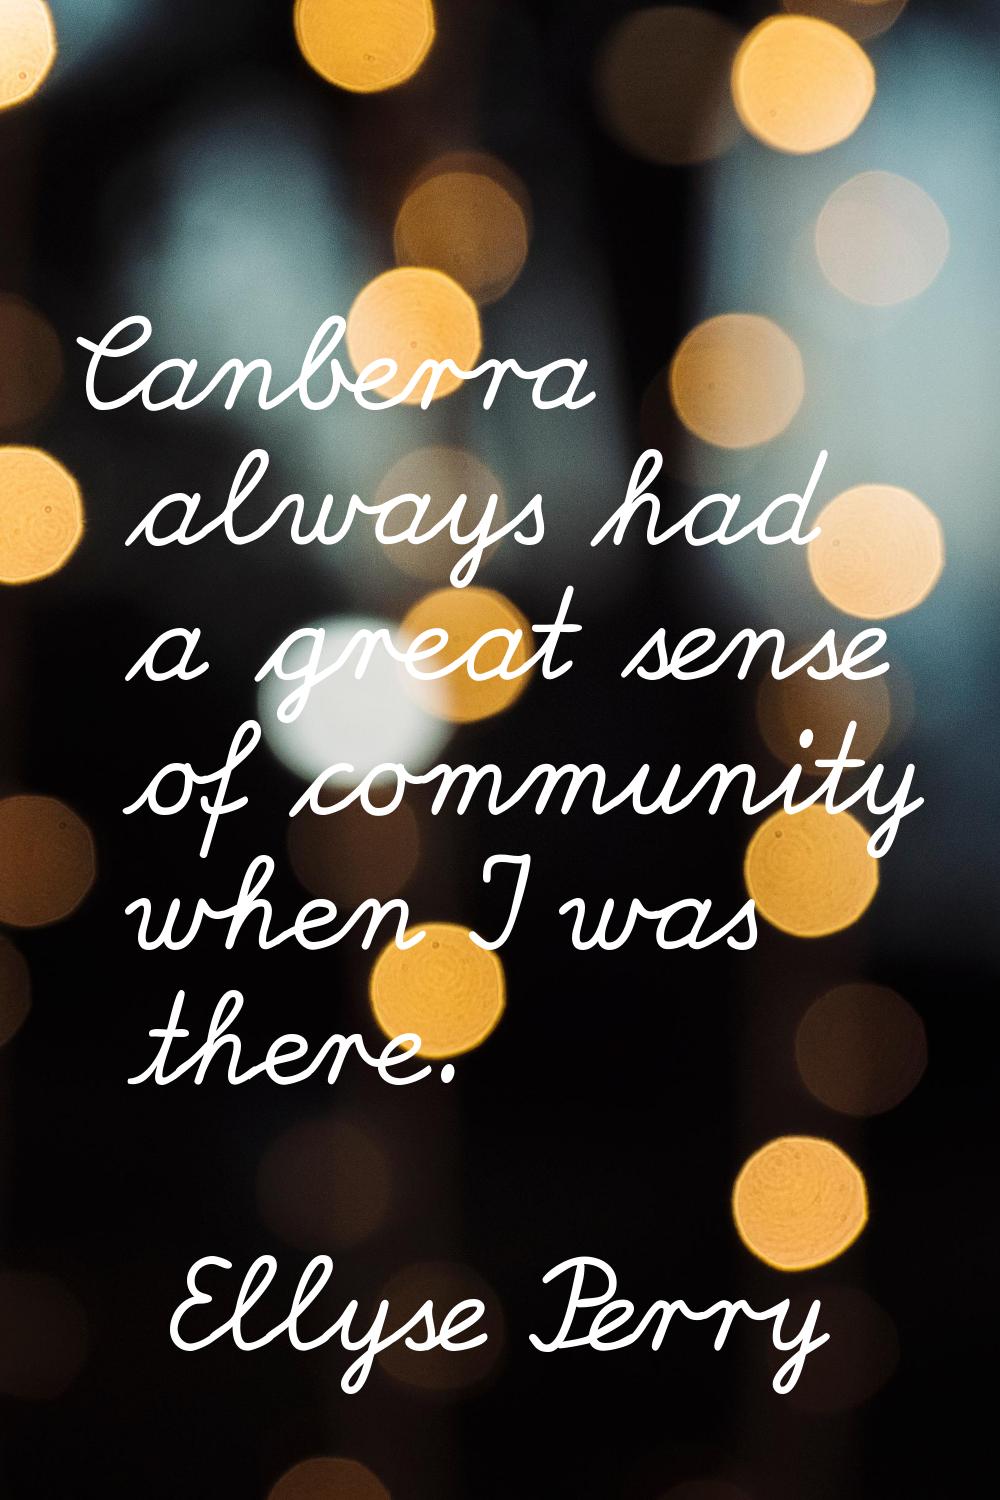 Canberra always had a great sense of community when I was there.